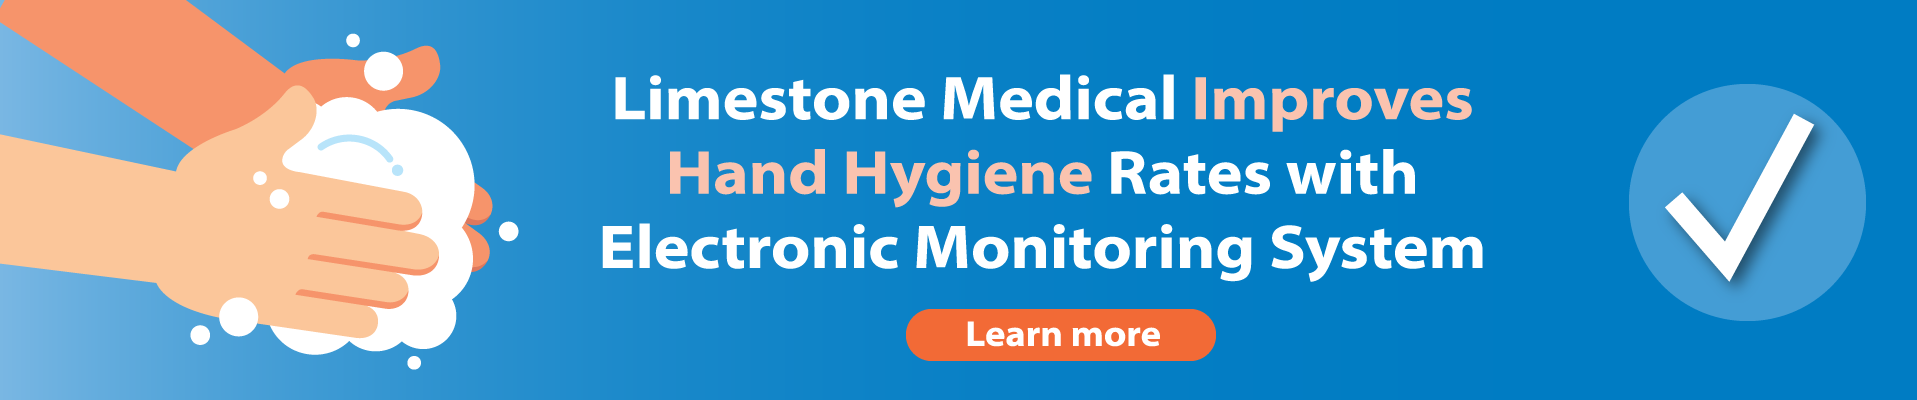 Learn more about Limestone Medical Improves Hand Hygiene Rates with Electronic Monitoring System